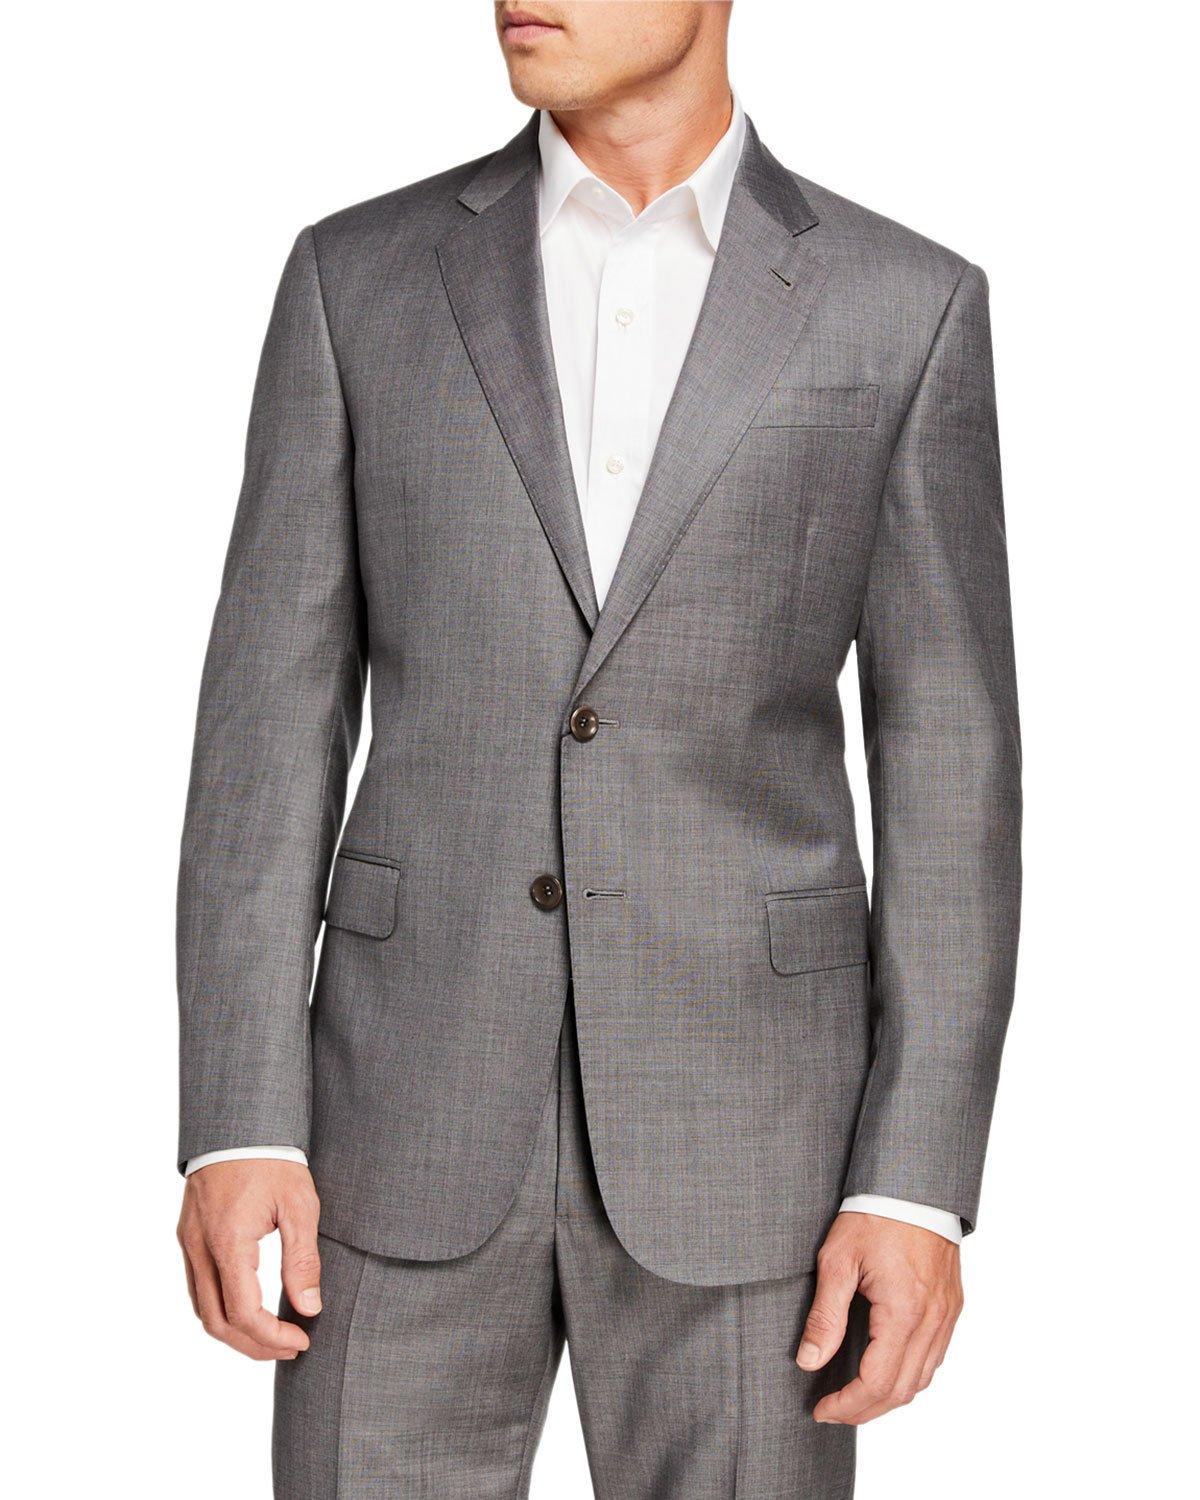 Giorgio Armani Wool Men's Sharkskin Two-piece Suit in Gray for Men - Lyst